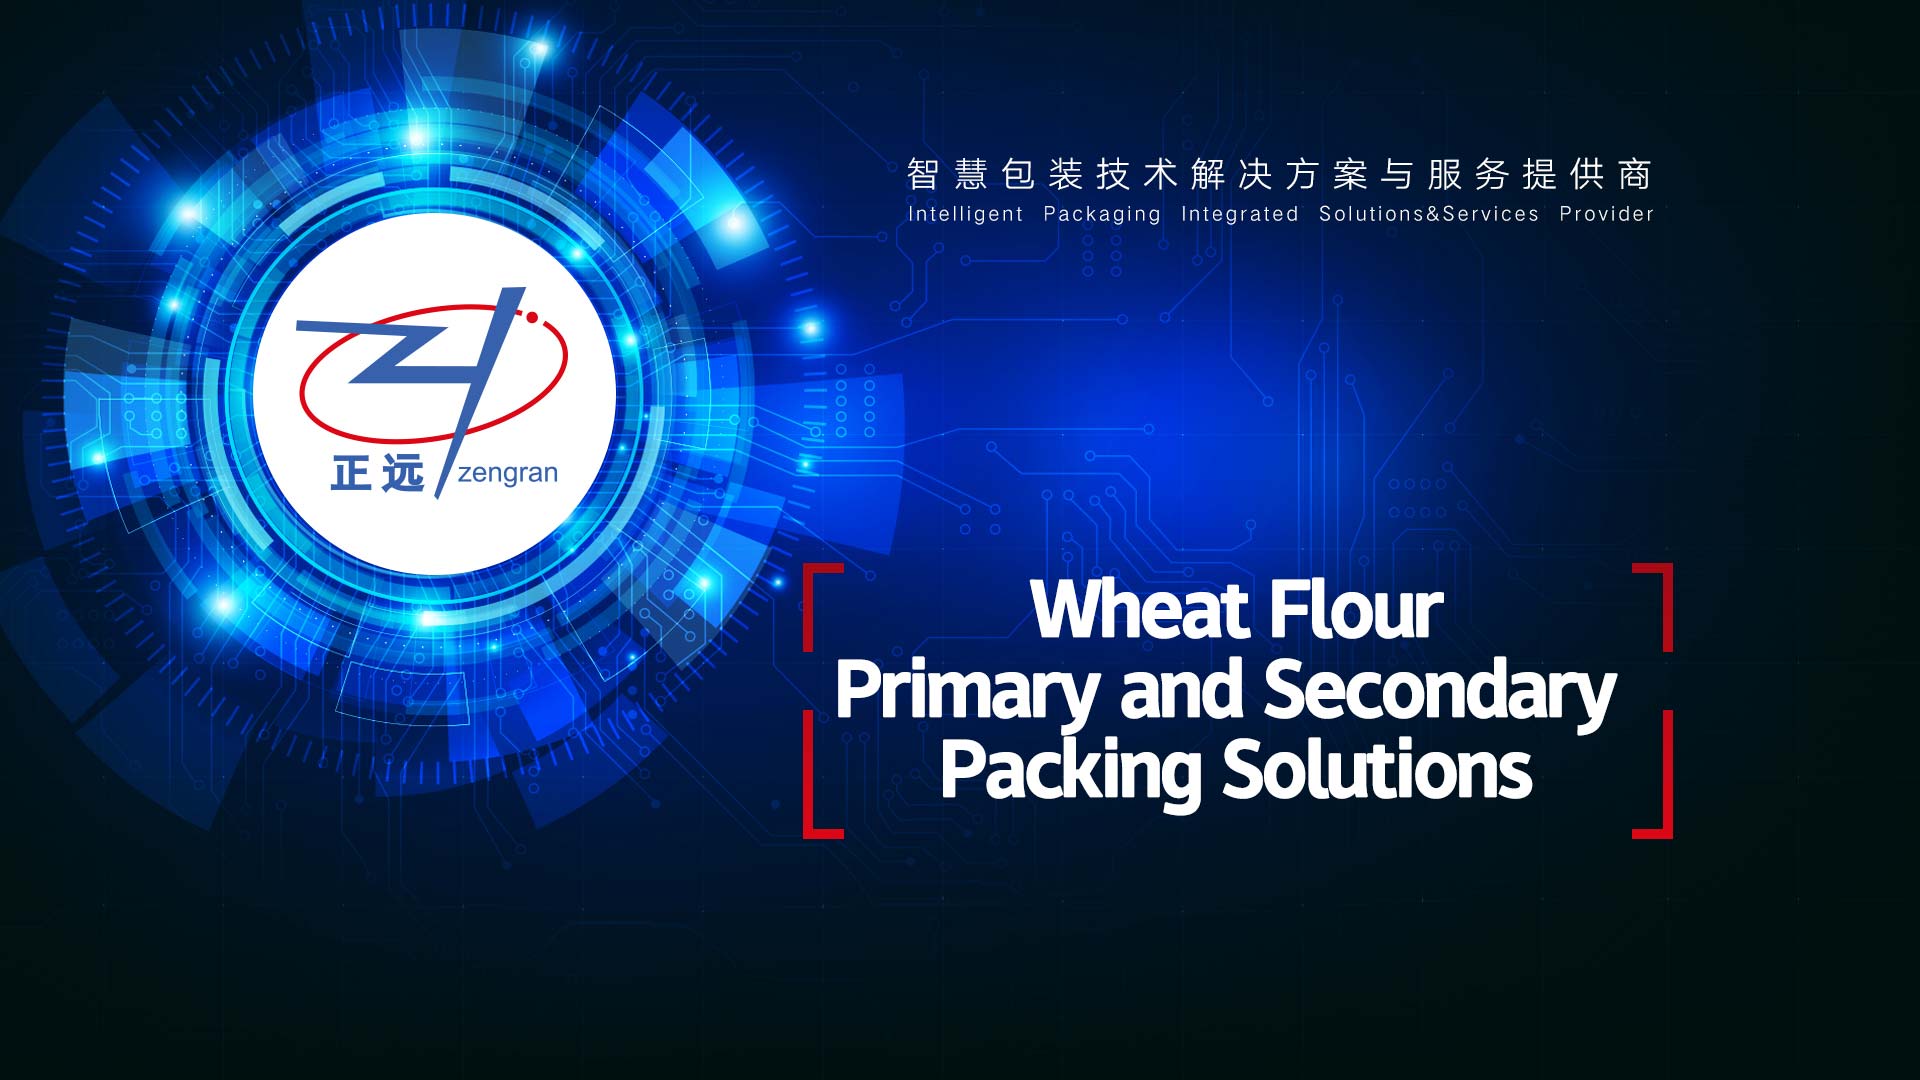 Complete Wheat Flour Packaging Solutions | Primary and Secondary Packing | Pouch in Bag Packaging